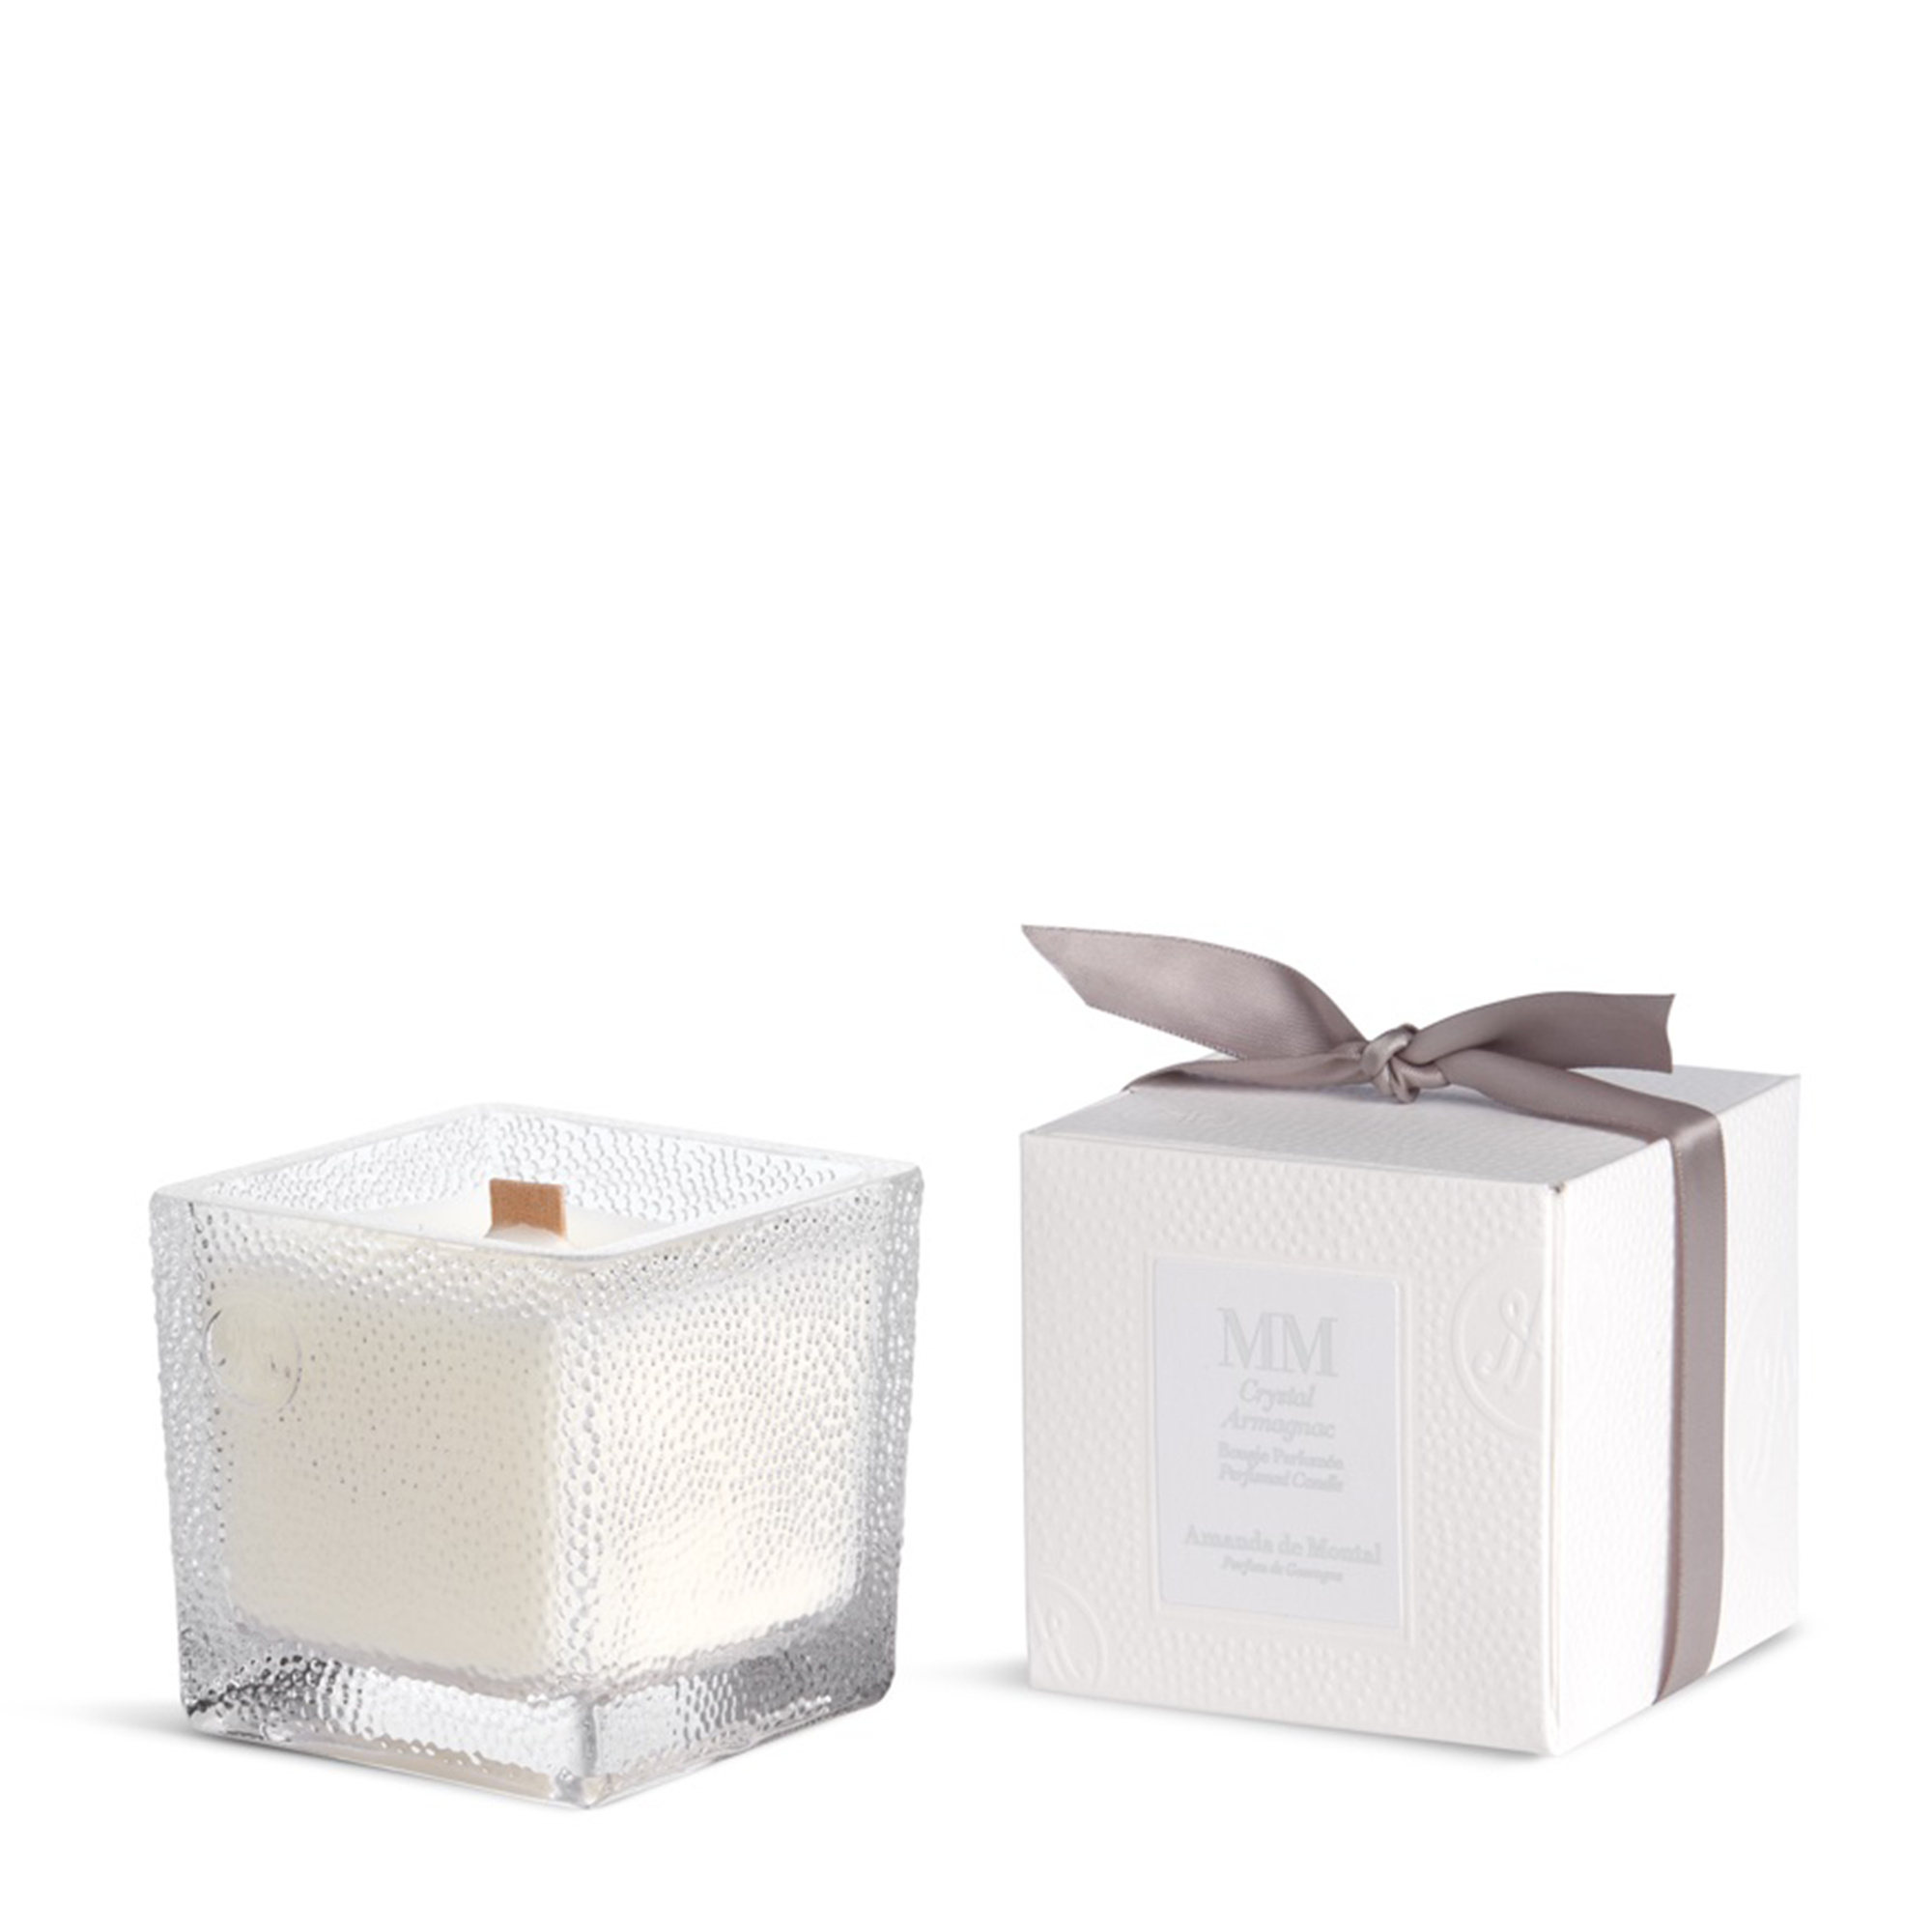 Infused with vintage 2000 Armagnac, this candle features an eye-catching wooden wick and a clear crystal vessel. It contains fragrances of prune, cedarwood, and festive spice.